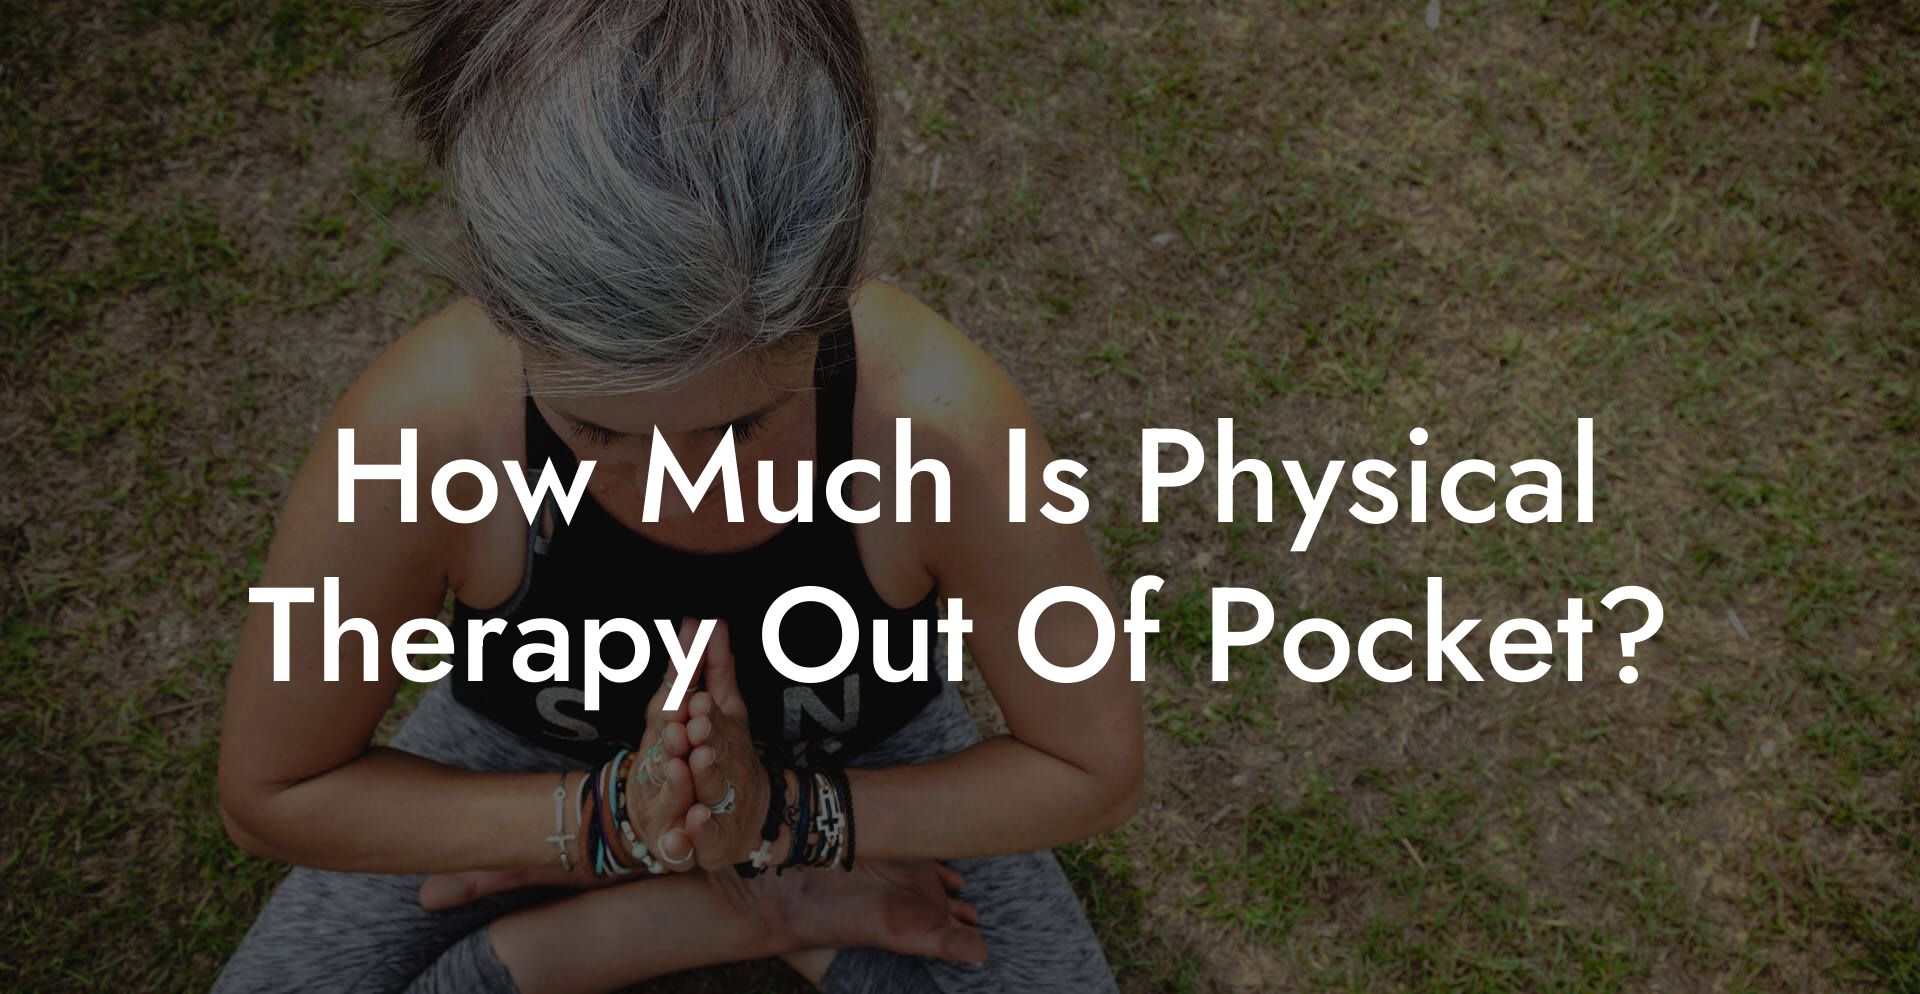 How Much Is Physical Therapy Out Of Pocket?